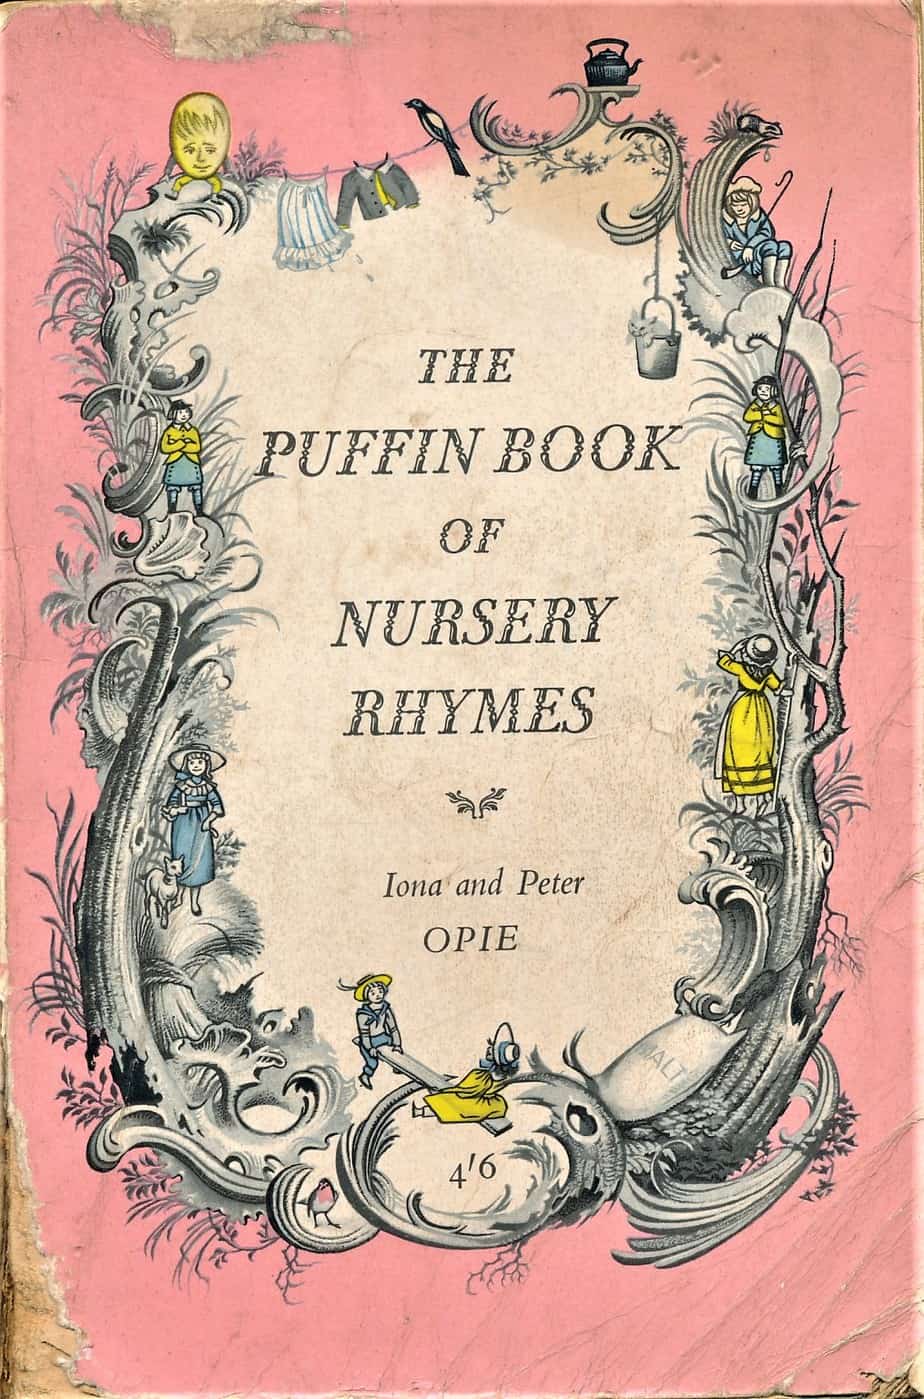 The Puffin Book Of Nursery Rhymes,  Iona and Peter Opie, Ill. Pauline Baynes (Penguin Books Ltd, 1963)